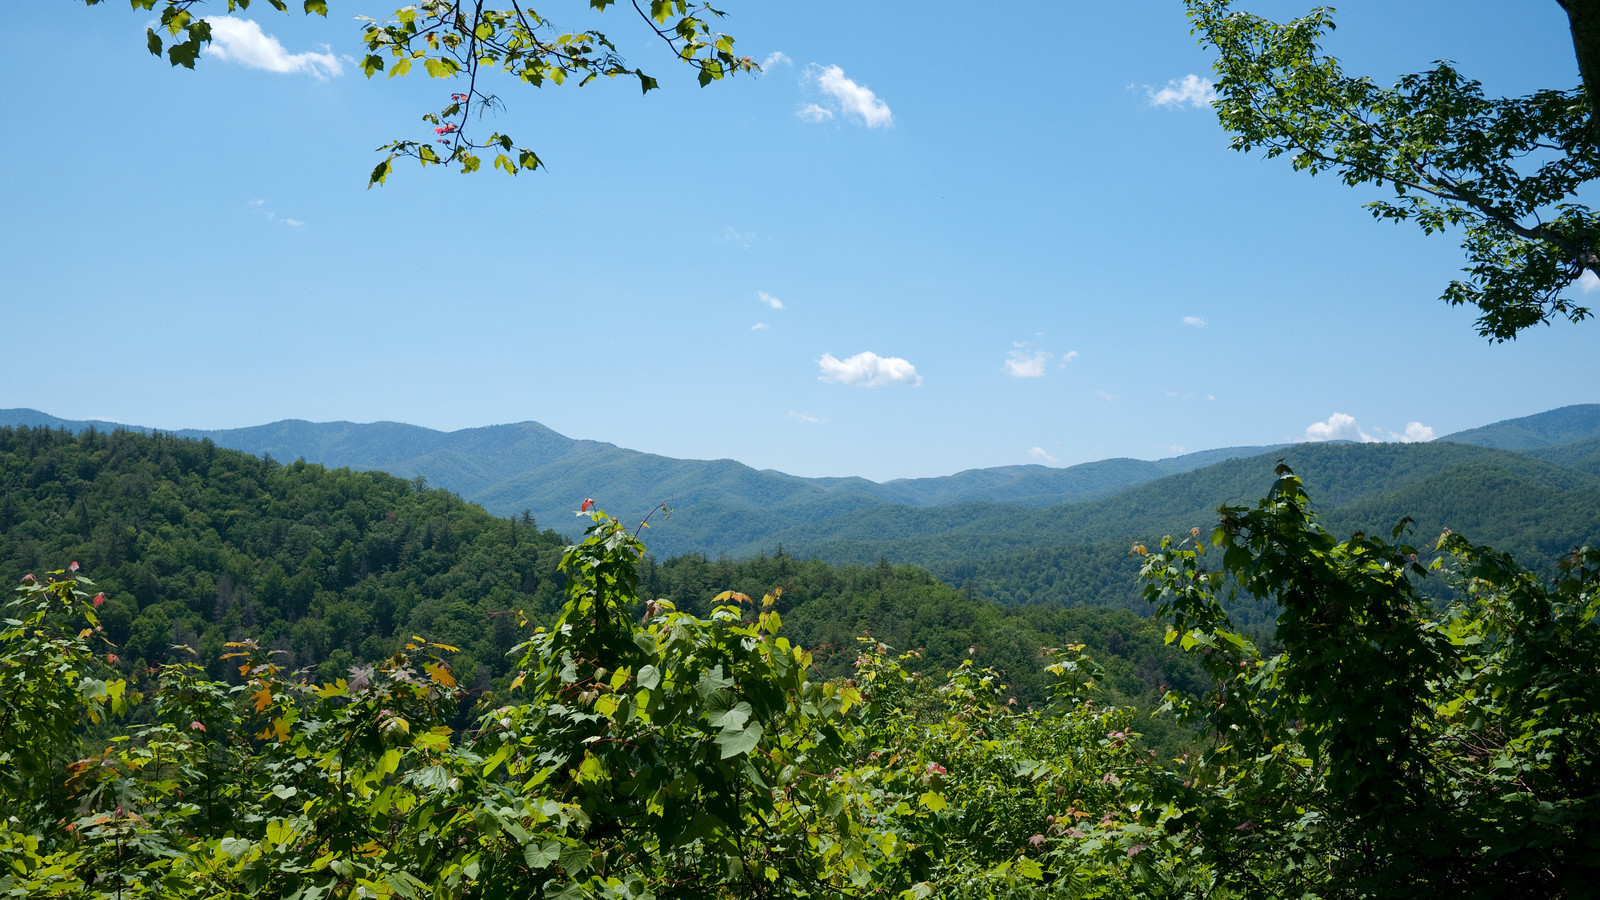 View of Cataloochee area in Great Smoky Mountains